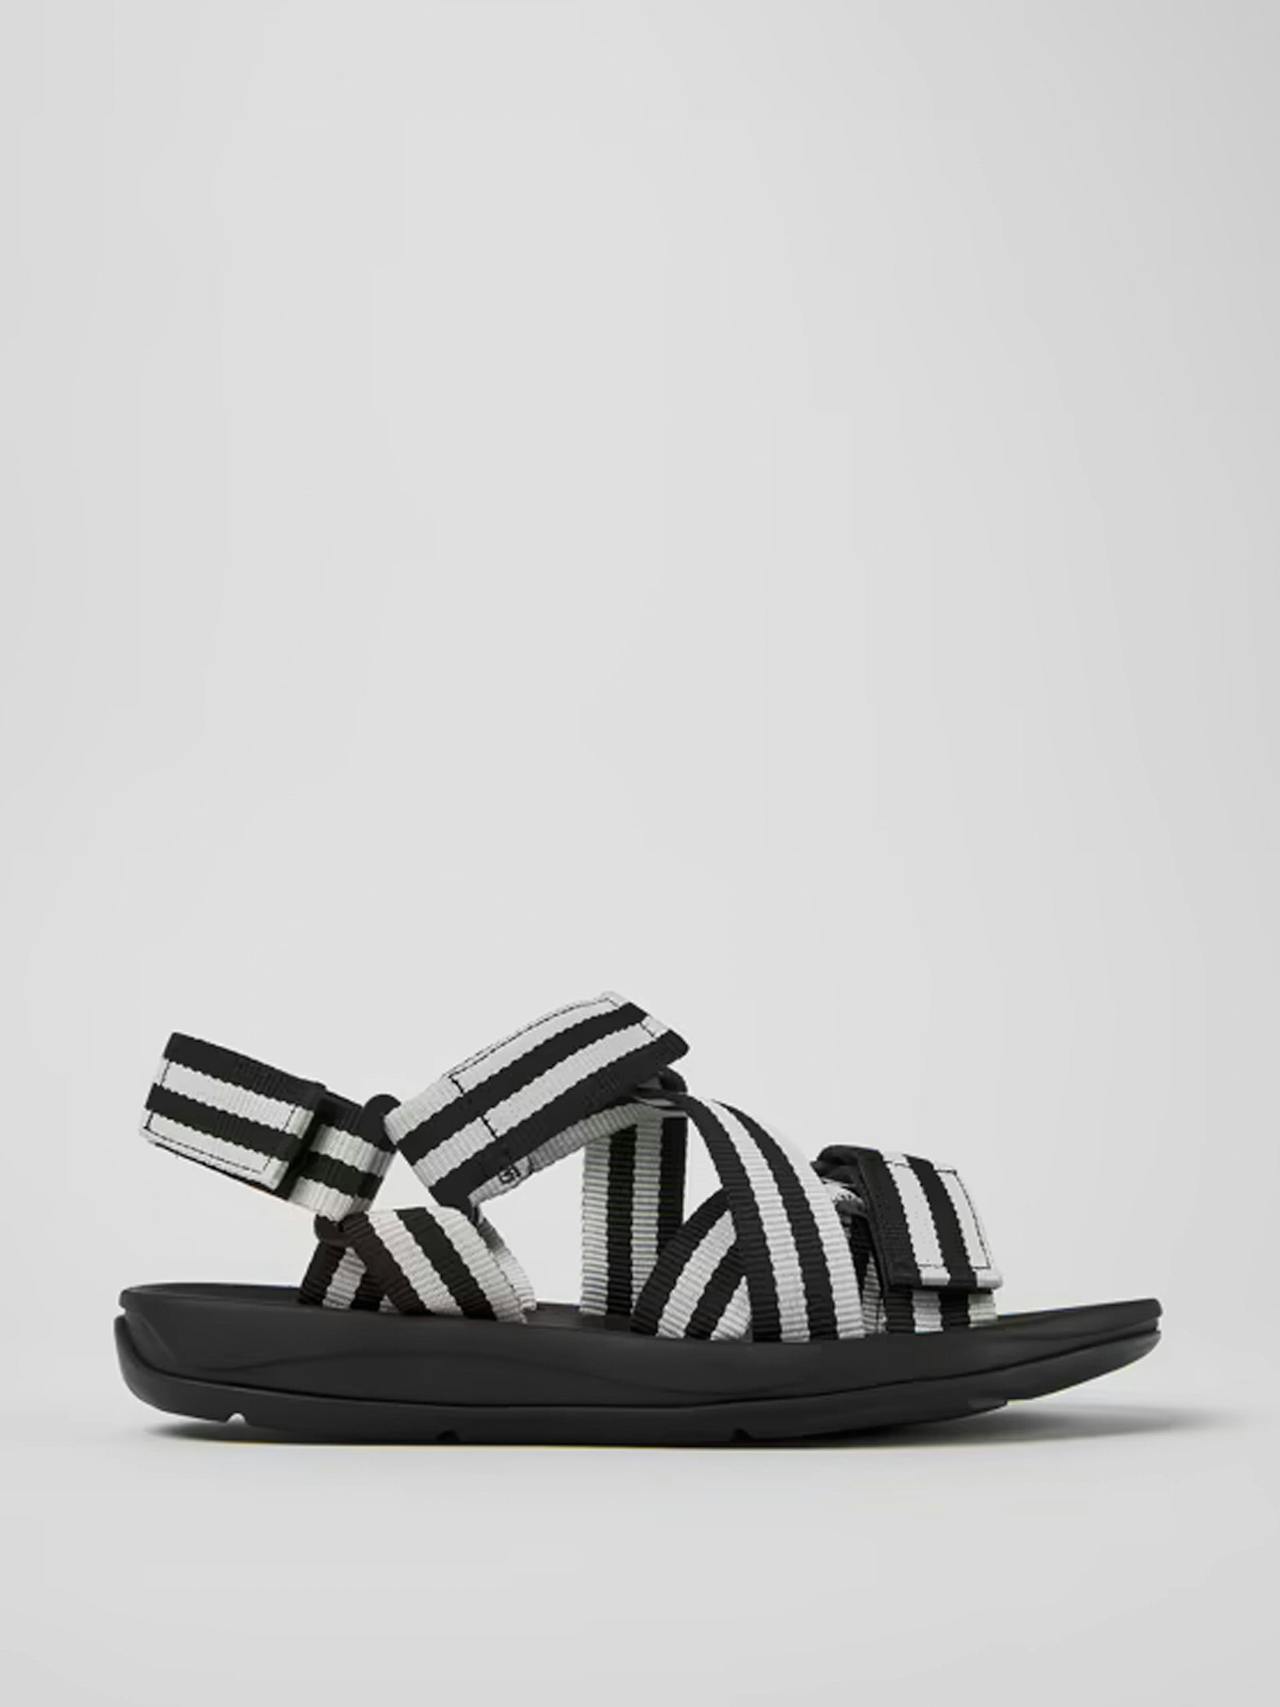 Match black and white sandals